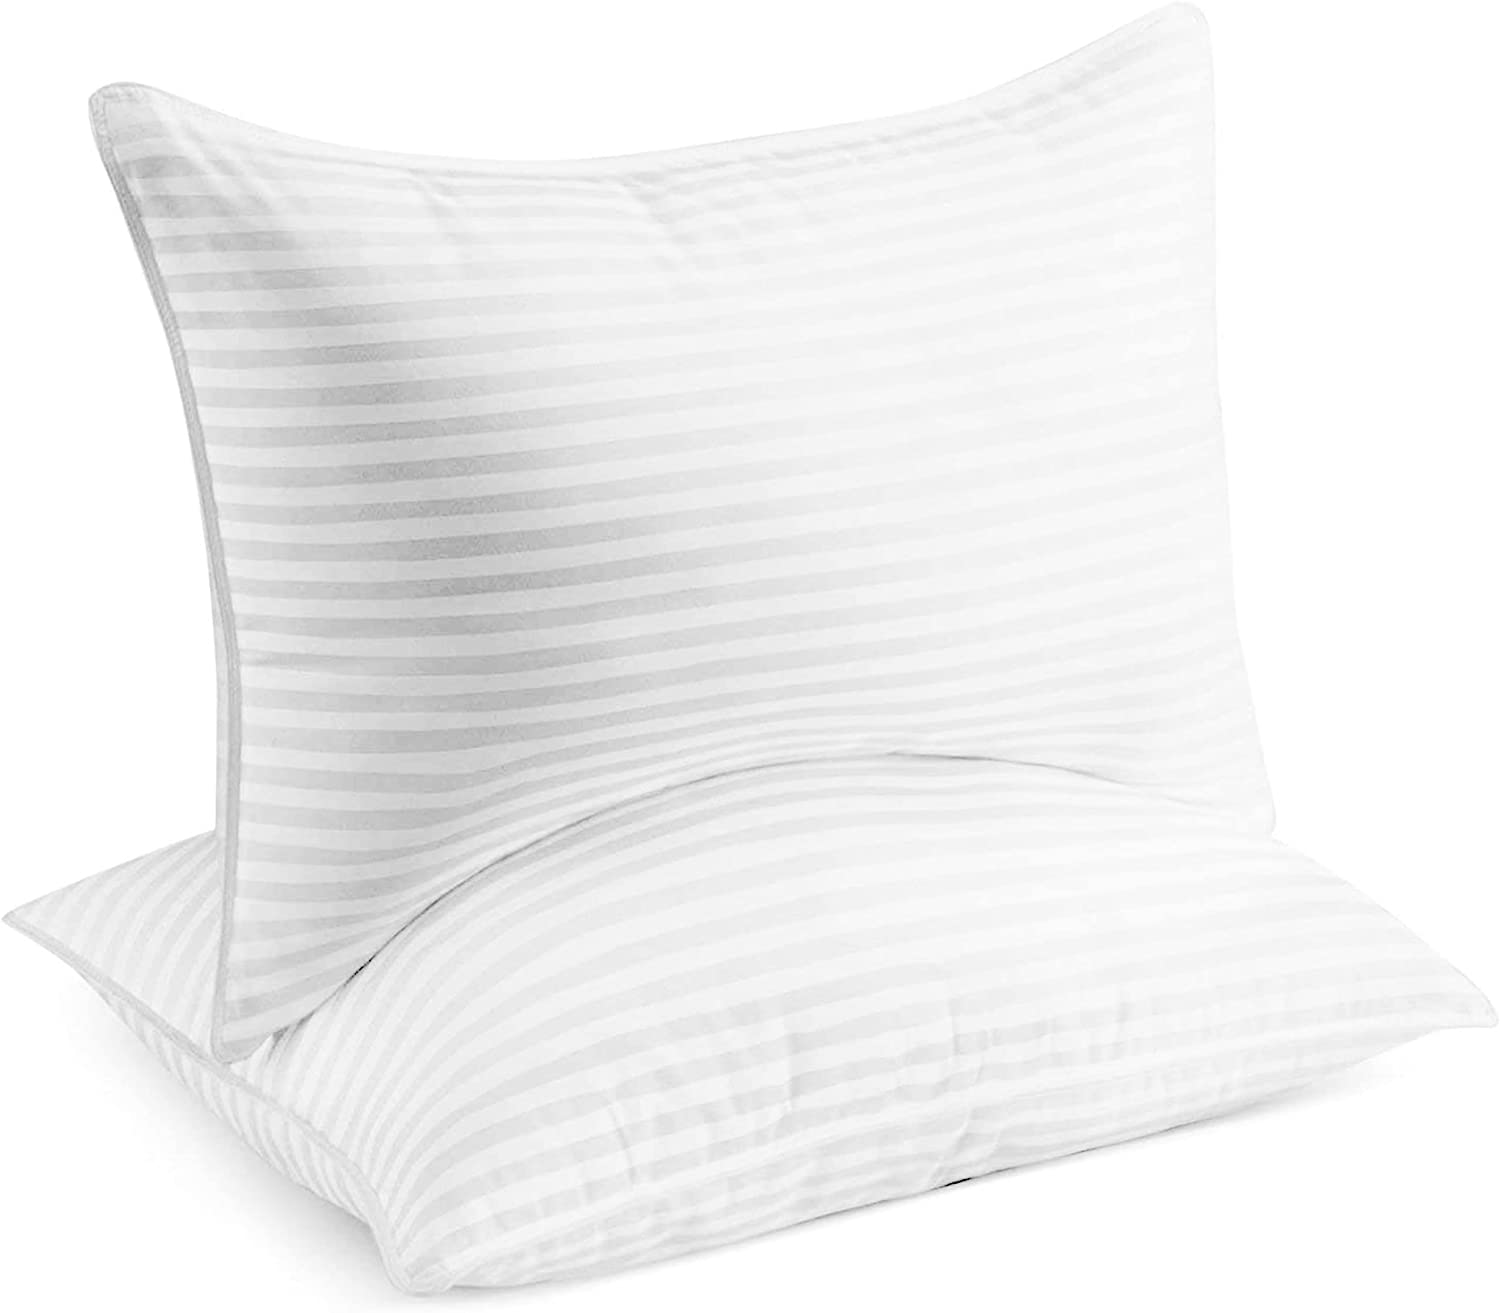 Beckham Hotel Collection Cooling Gel Bed Pillows for night sweats